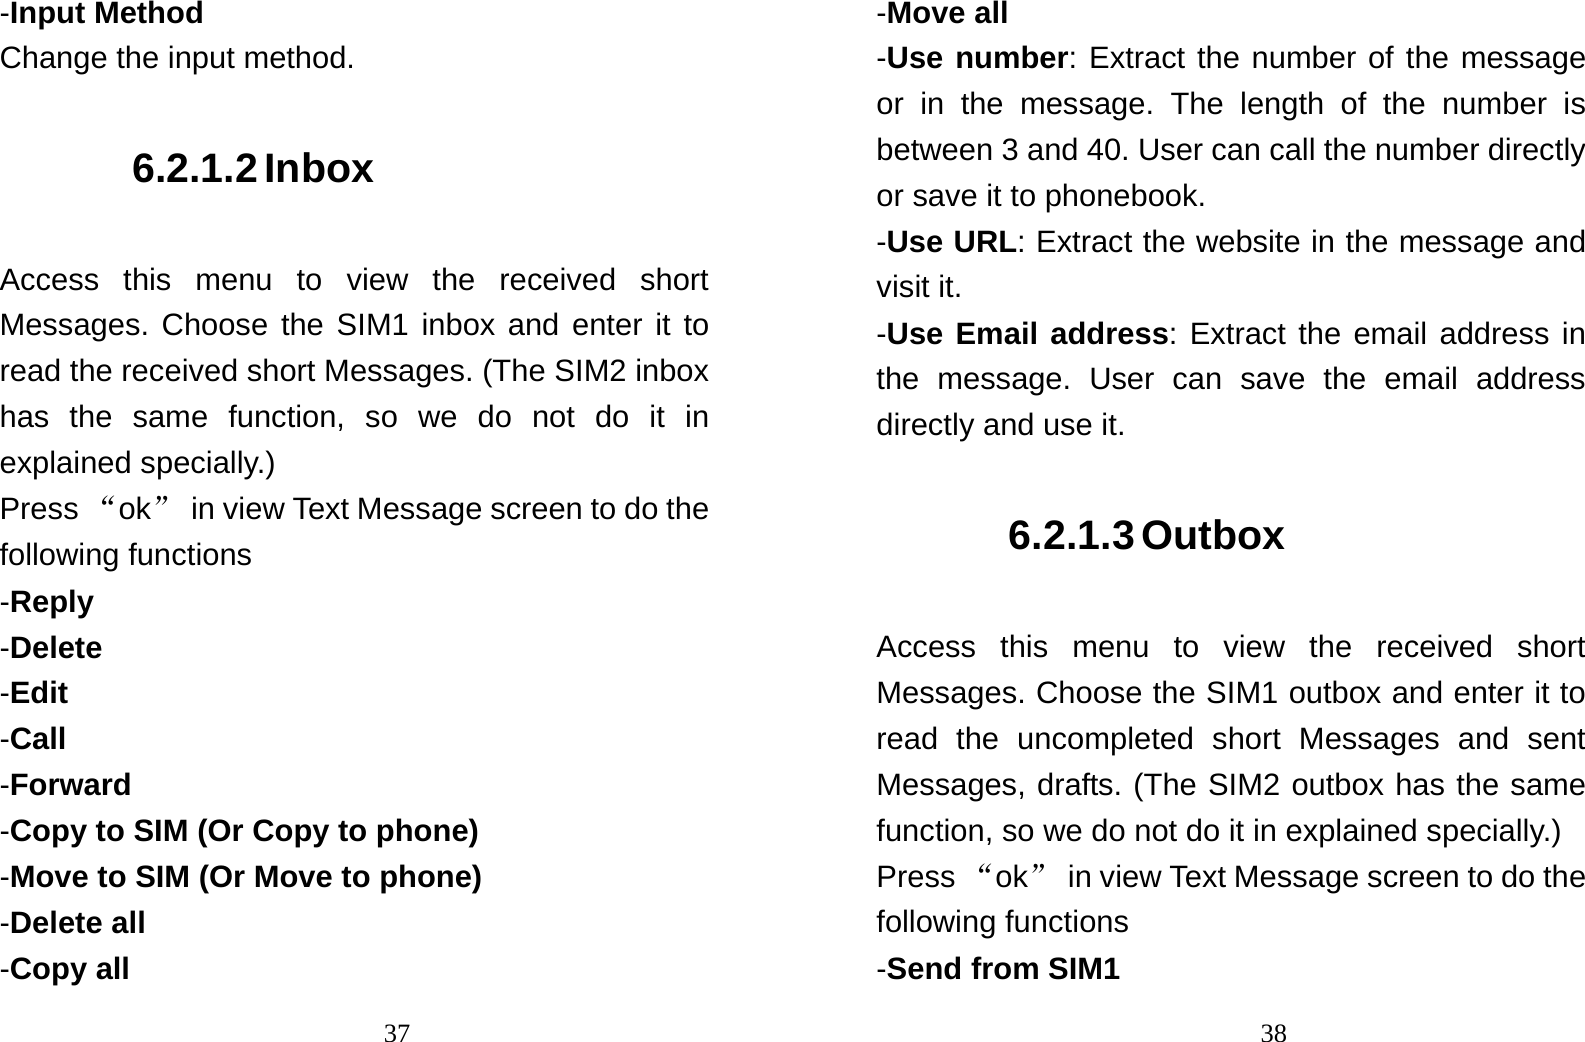                                37-Input Method Change the input method. 6.2.1.2 Inbox Access this menu to view the received short Messages. Choose the SIM1 inbox and enter it to read the received short Messages. (The SIM2 inbox has the same function, so we do not do it in explained specially.) Press “ok”  in view Text Message screen to do the following functions -Reply -Delete -Edit -Call -Forward -Copy to SIM (Or Copy to phone) -Move to SIM (Or Move to phone) -Delete all -Copy all                                38-Move all -Use number: Extract the number of the message or in the message. The length of the number is between 3 and 40. User can call the number directly or save it to phonebook.    -Use URL: Extract the website in the message and visit it.  -Use Email address: Extract the email address in the message. User can save the email address directly and use it. 6.2.1.3 Outbox Access this menu to view the received short Messages. Choose the SIM1 outbox and enter it to read the uncompleted short Messages and sent Messages, drafts. (The SIM2 outbox has the same function, so we do not do it in explained specially.) Press “ok”  in view Text Message screen to do the following functions -Send from SIM1 